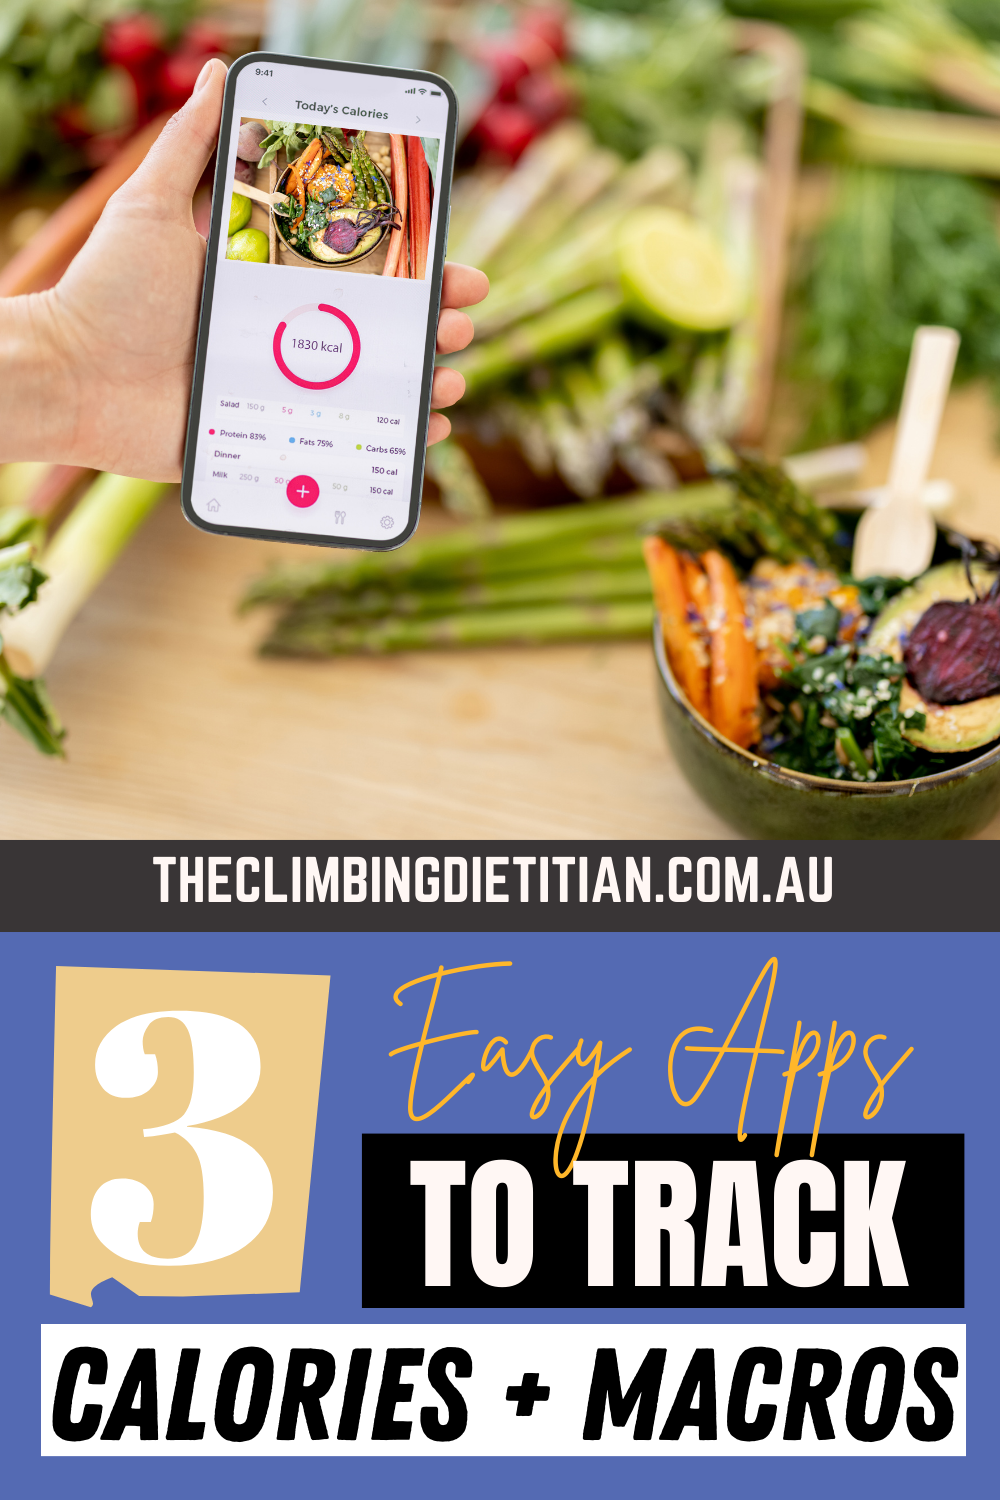 3-food-tracking-apps-reviewed-calorie-macro-counting-fat-loss-muscle-building-brisbane-dietitian-nutritionist